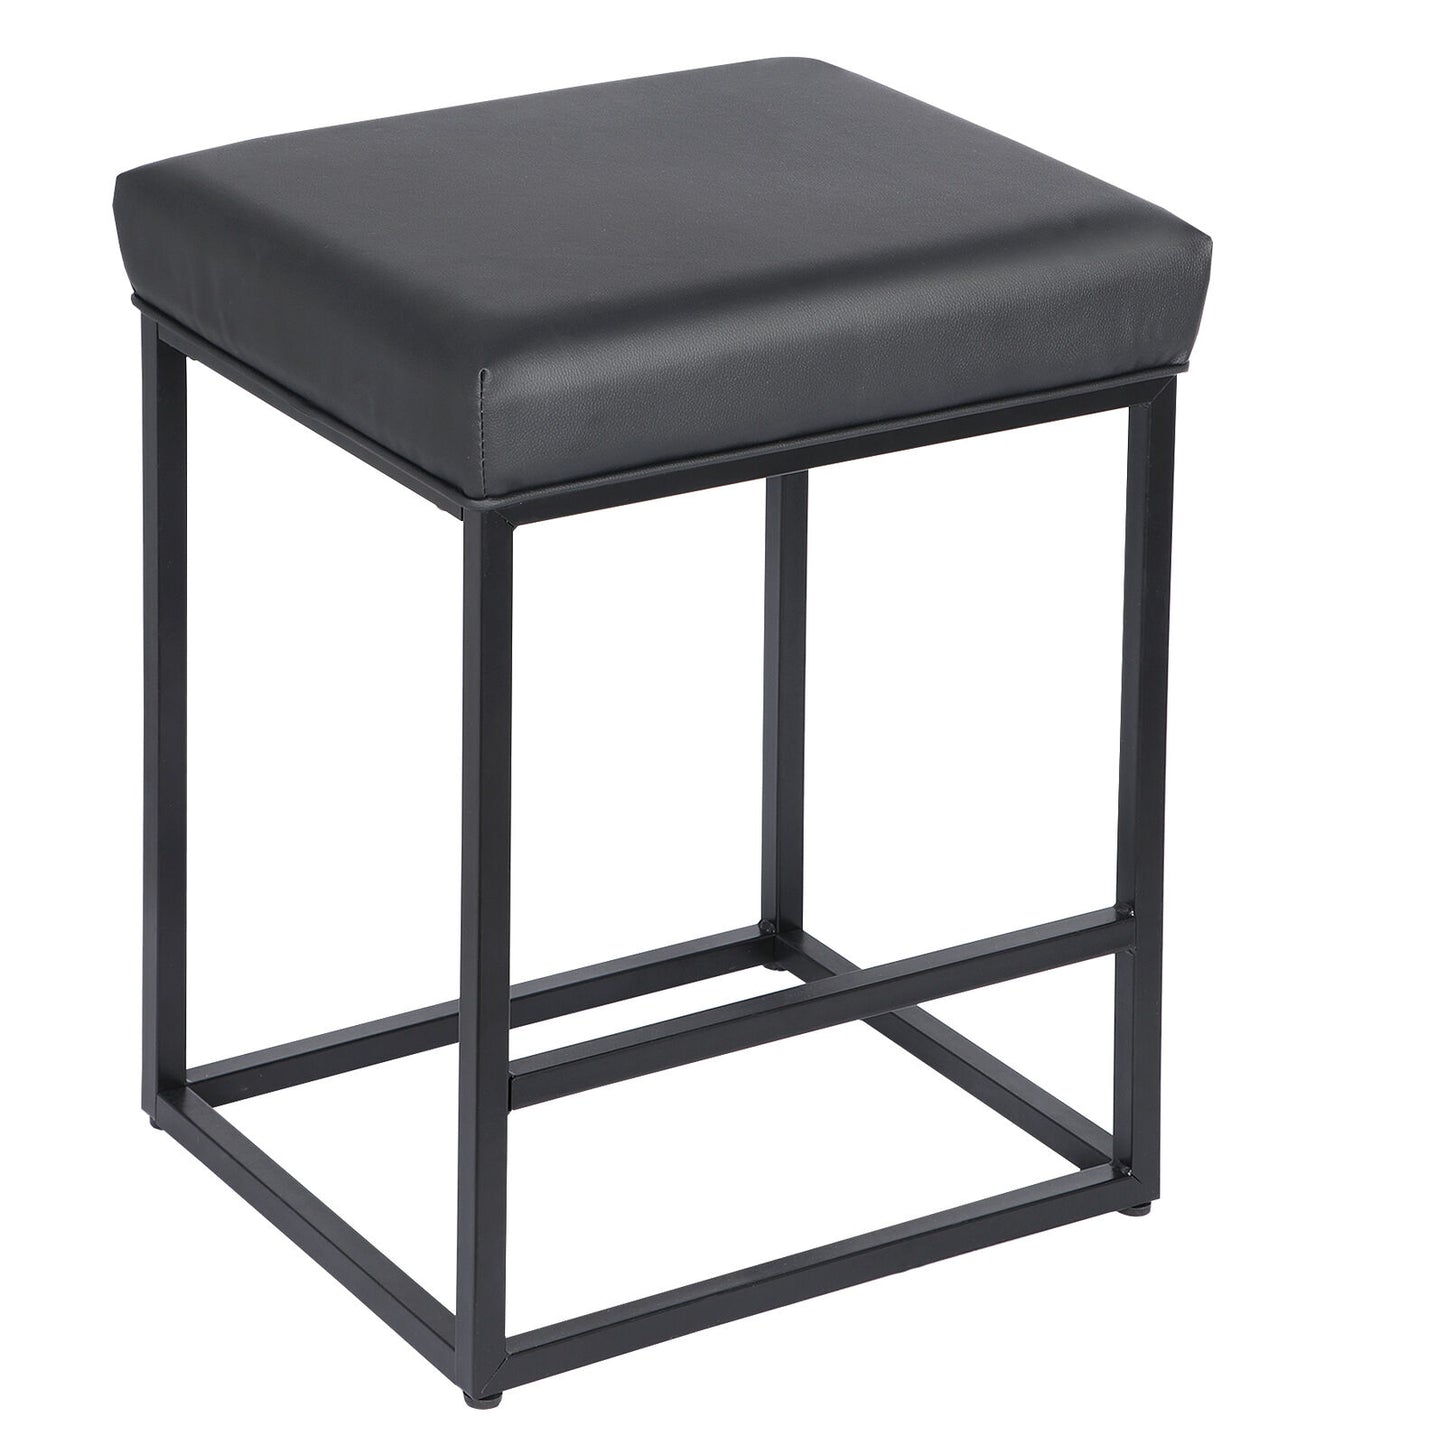 Black Counter Height 24" Bar Stools Set of 4 for Kitchen Counter Backless Modern